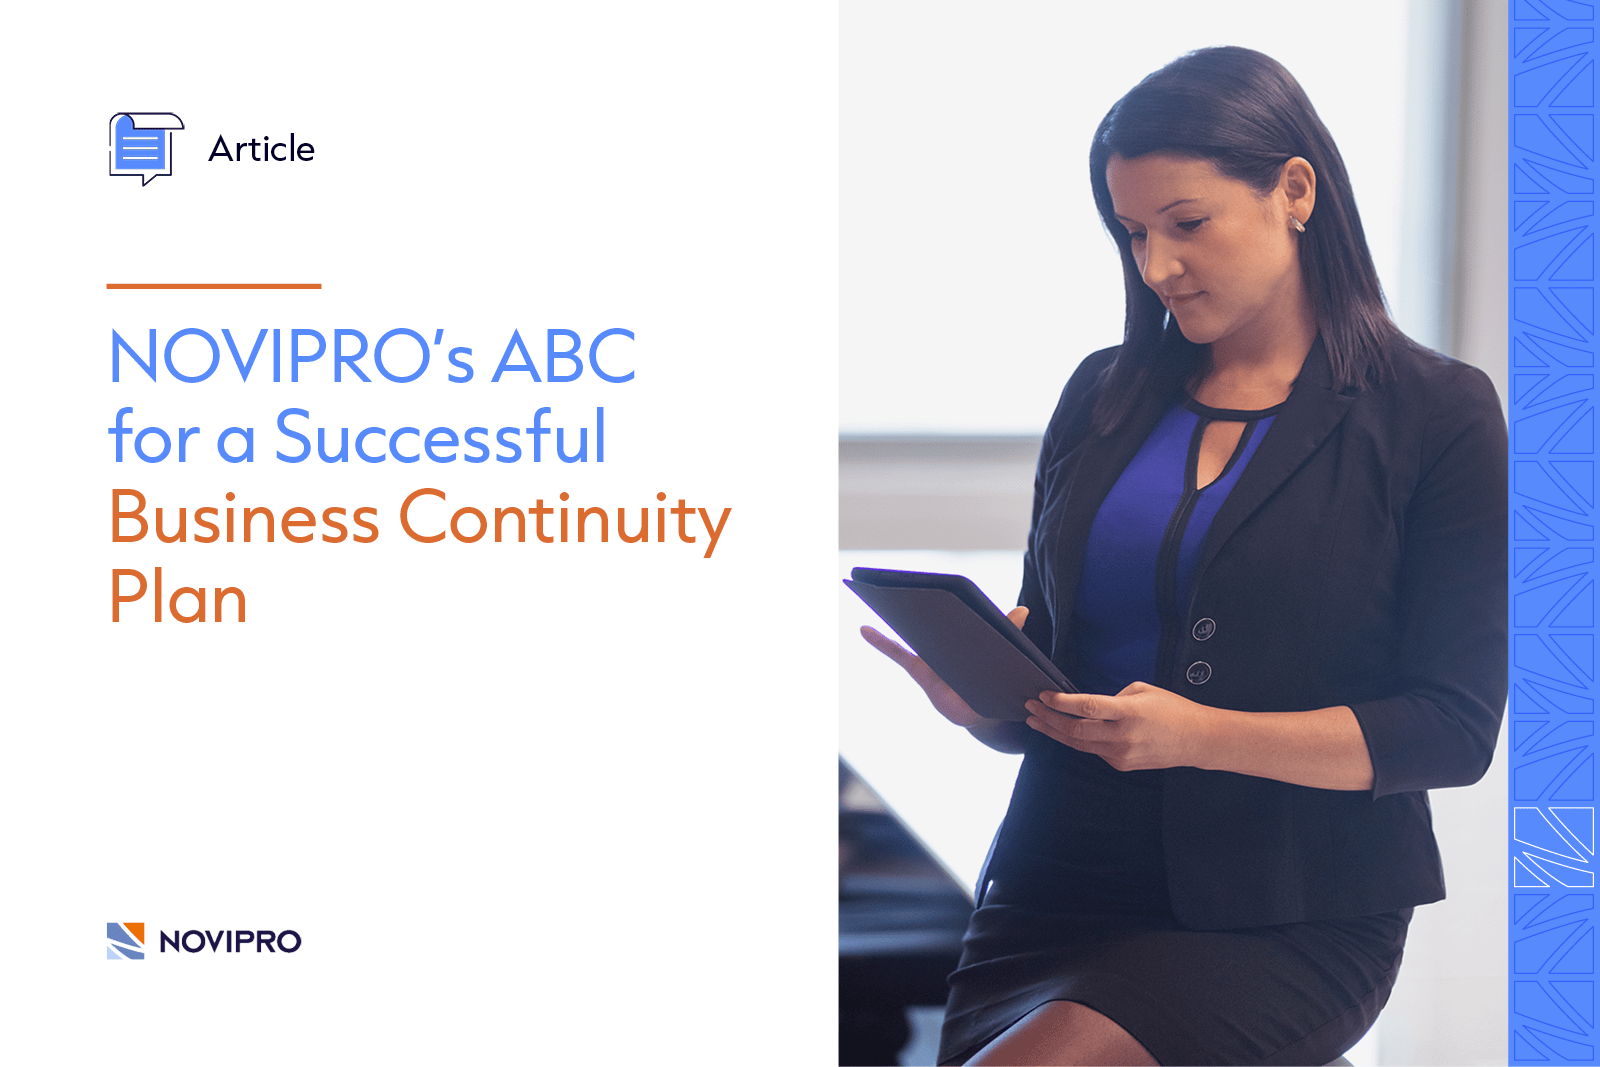 NOVIPRO's ABC for a Successful Business Continuity Plan